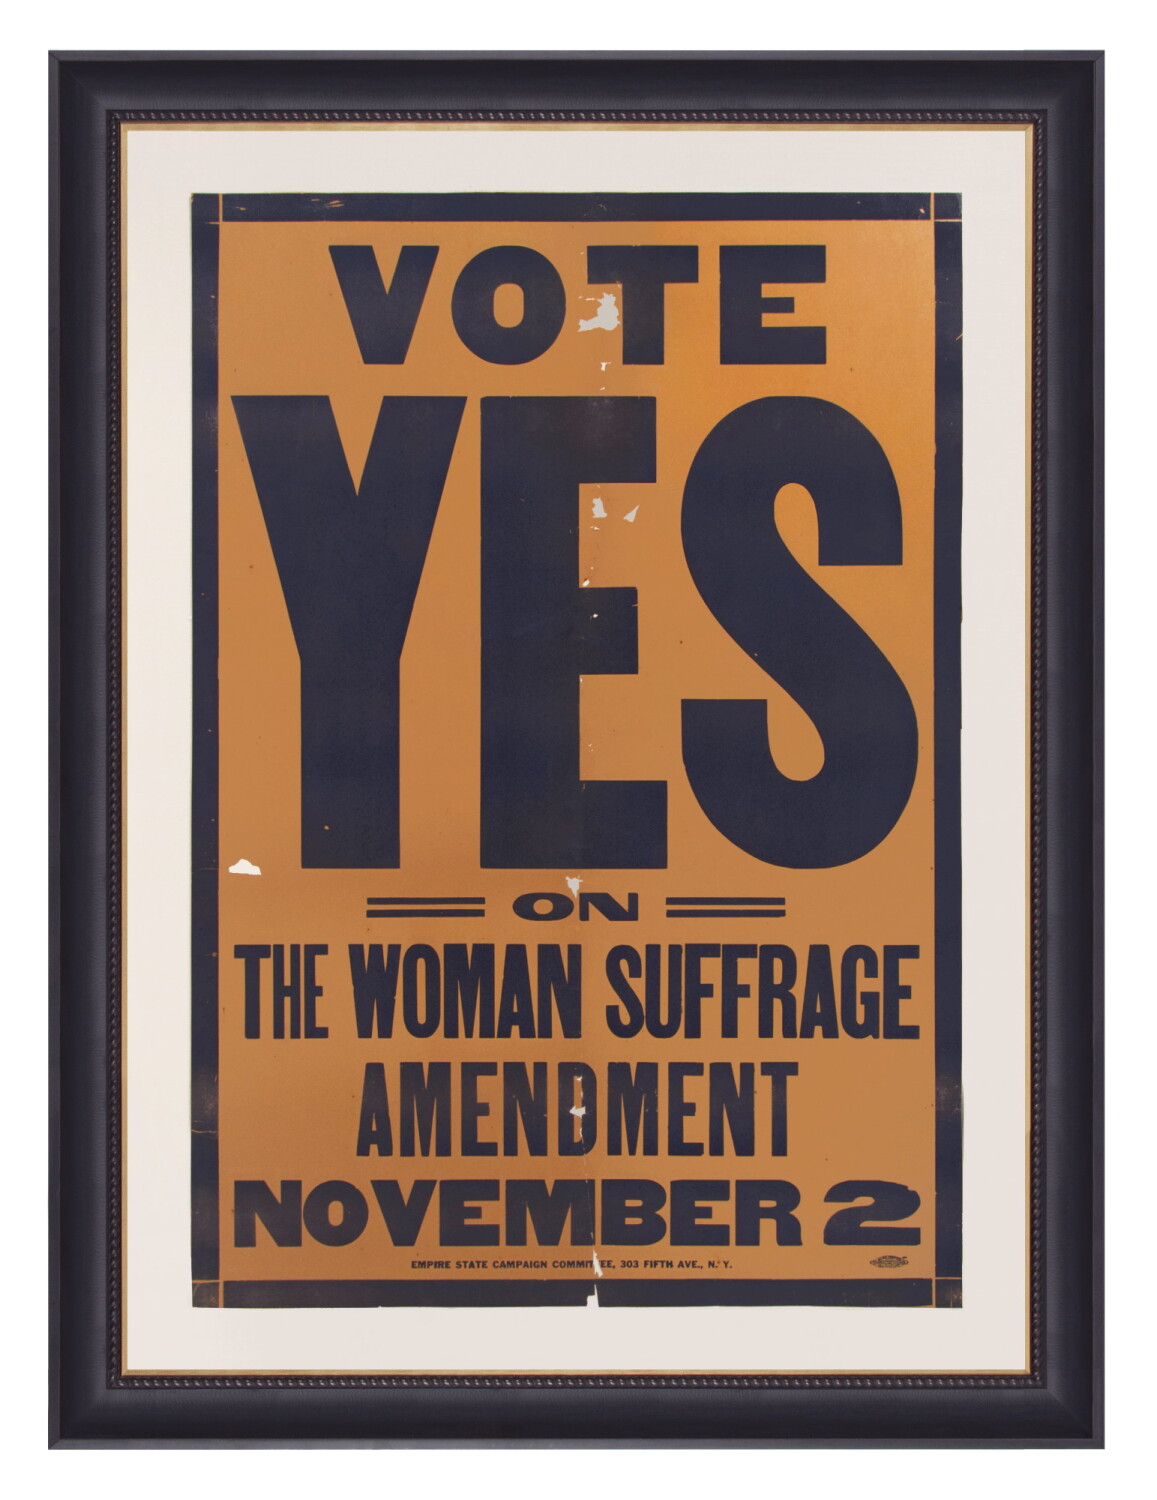 RARE & BOLDLY GRAPHIC AMERICAN SUFFRAGETTE POSTER, COMMISSIONED BY THE EMPIRE STATE CAMPAIGN COMMITTEE, CARRIE CHAPMAN CATT’S GROUP, circa 1915